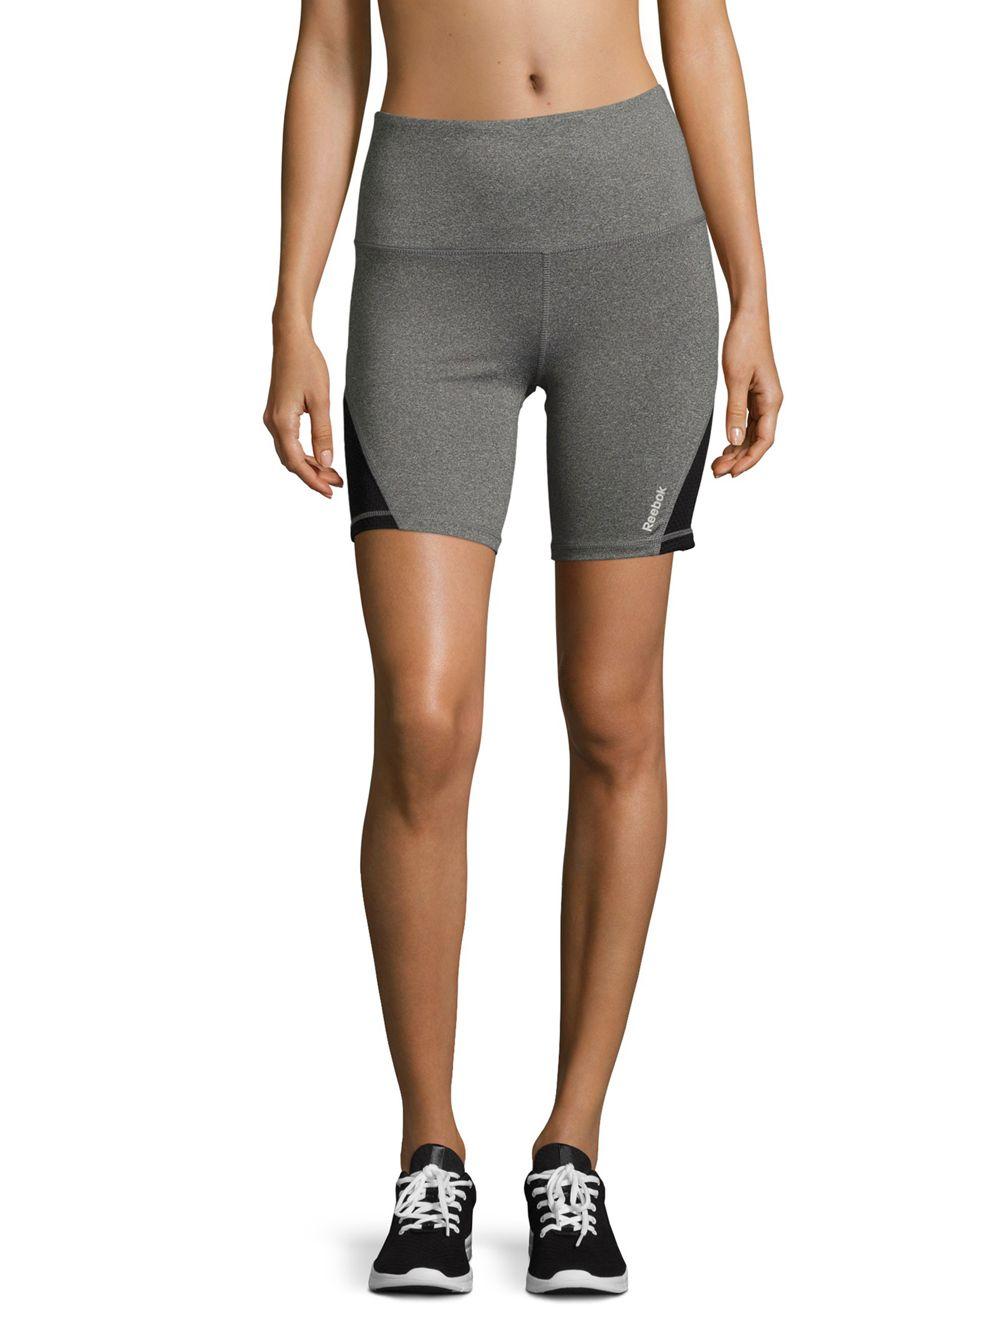 Lyst - Reebok Super Charged Heathered Shorts in Gray